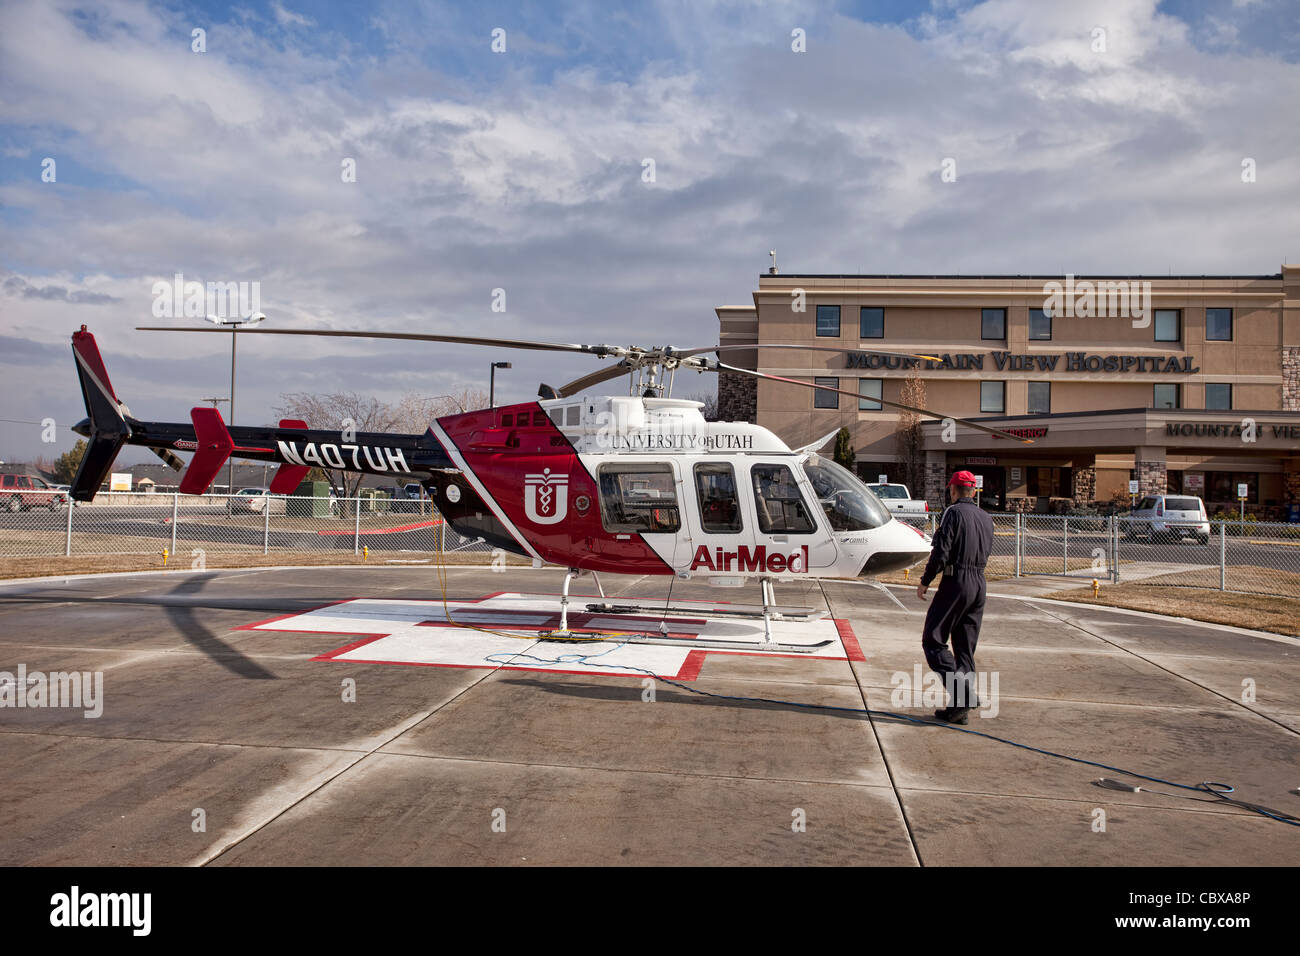 Helicopter pilot AirMed from University of Utah Medical Center pilot getting ready for emergency flight in front of hospital. Stock Photo